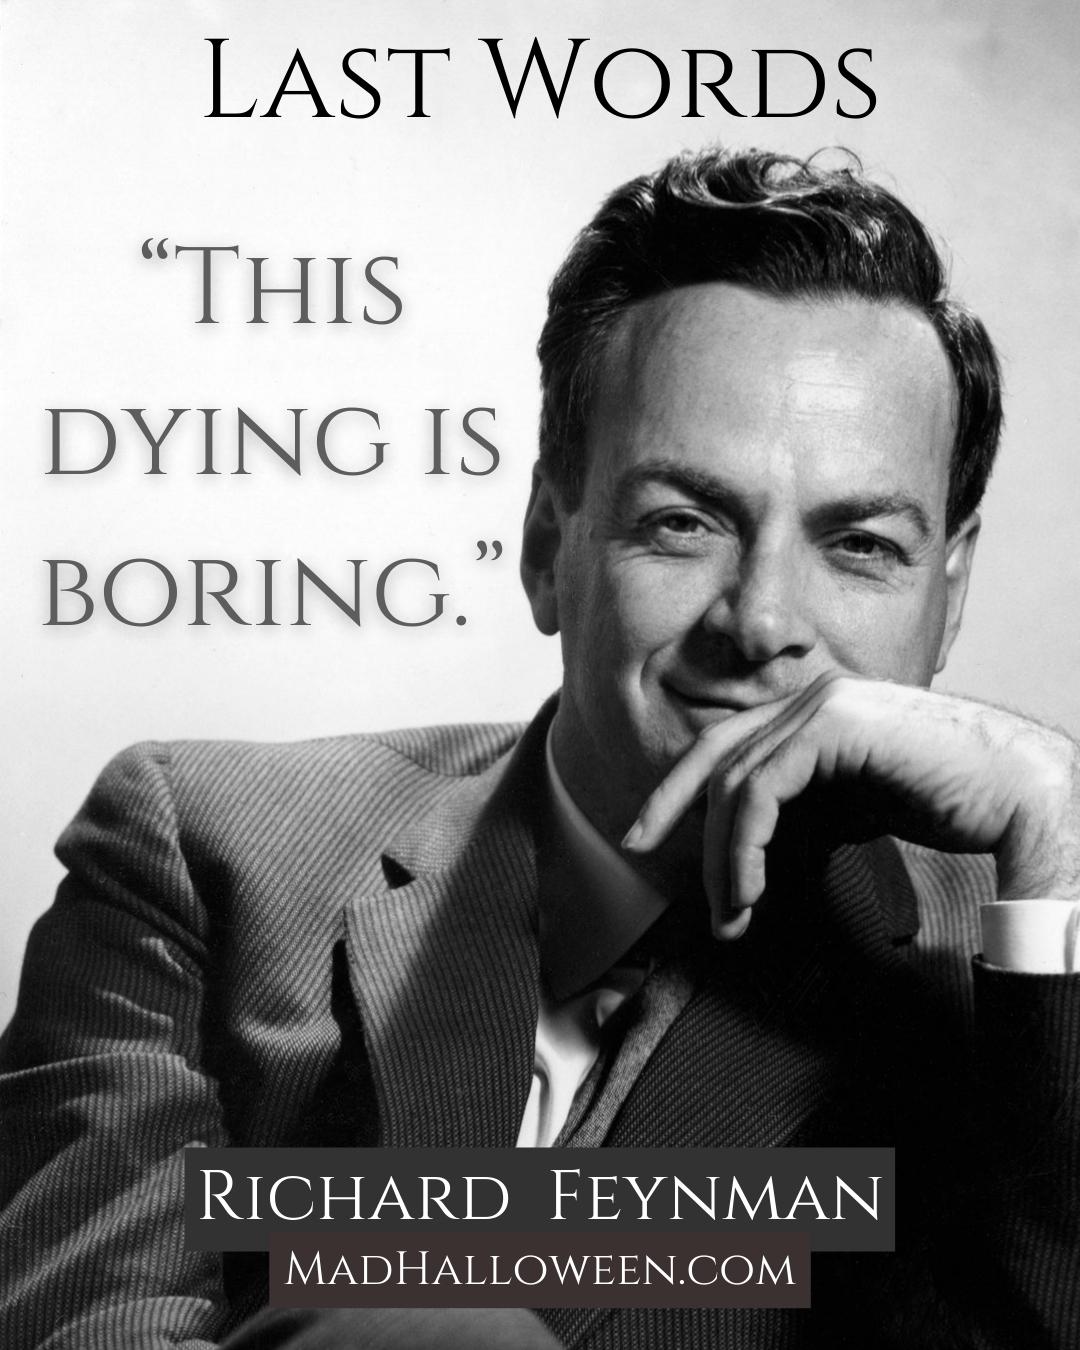 Famous Last Words Quotes of the Departed - Richard Feynman - Mad Halloween